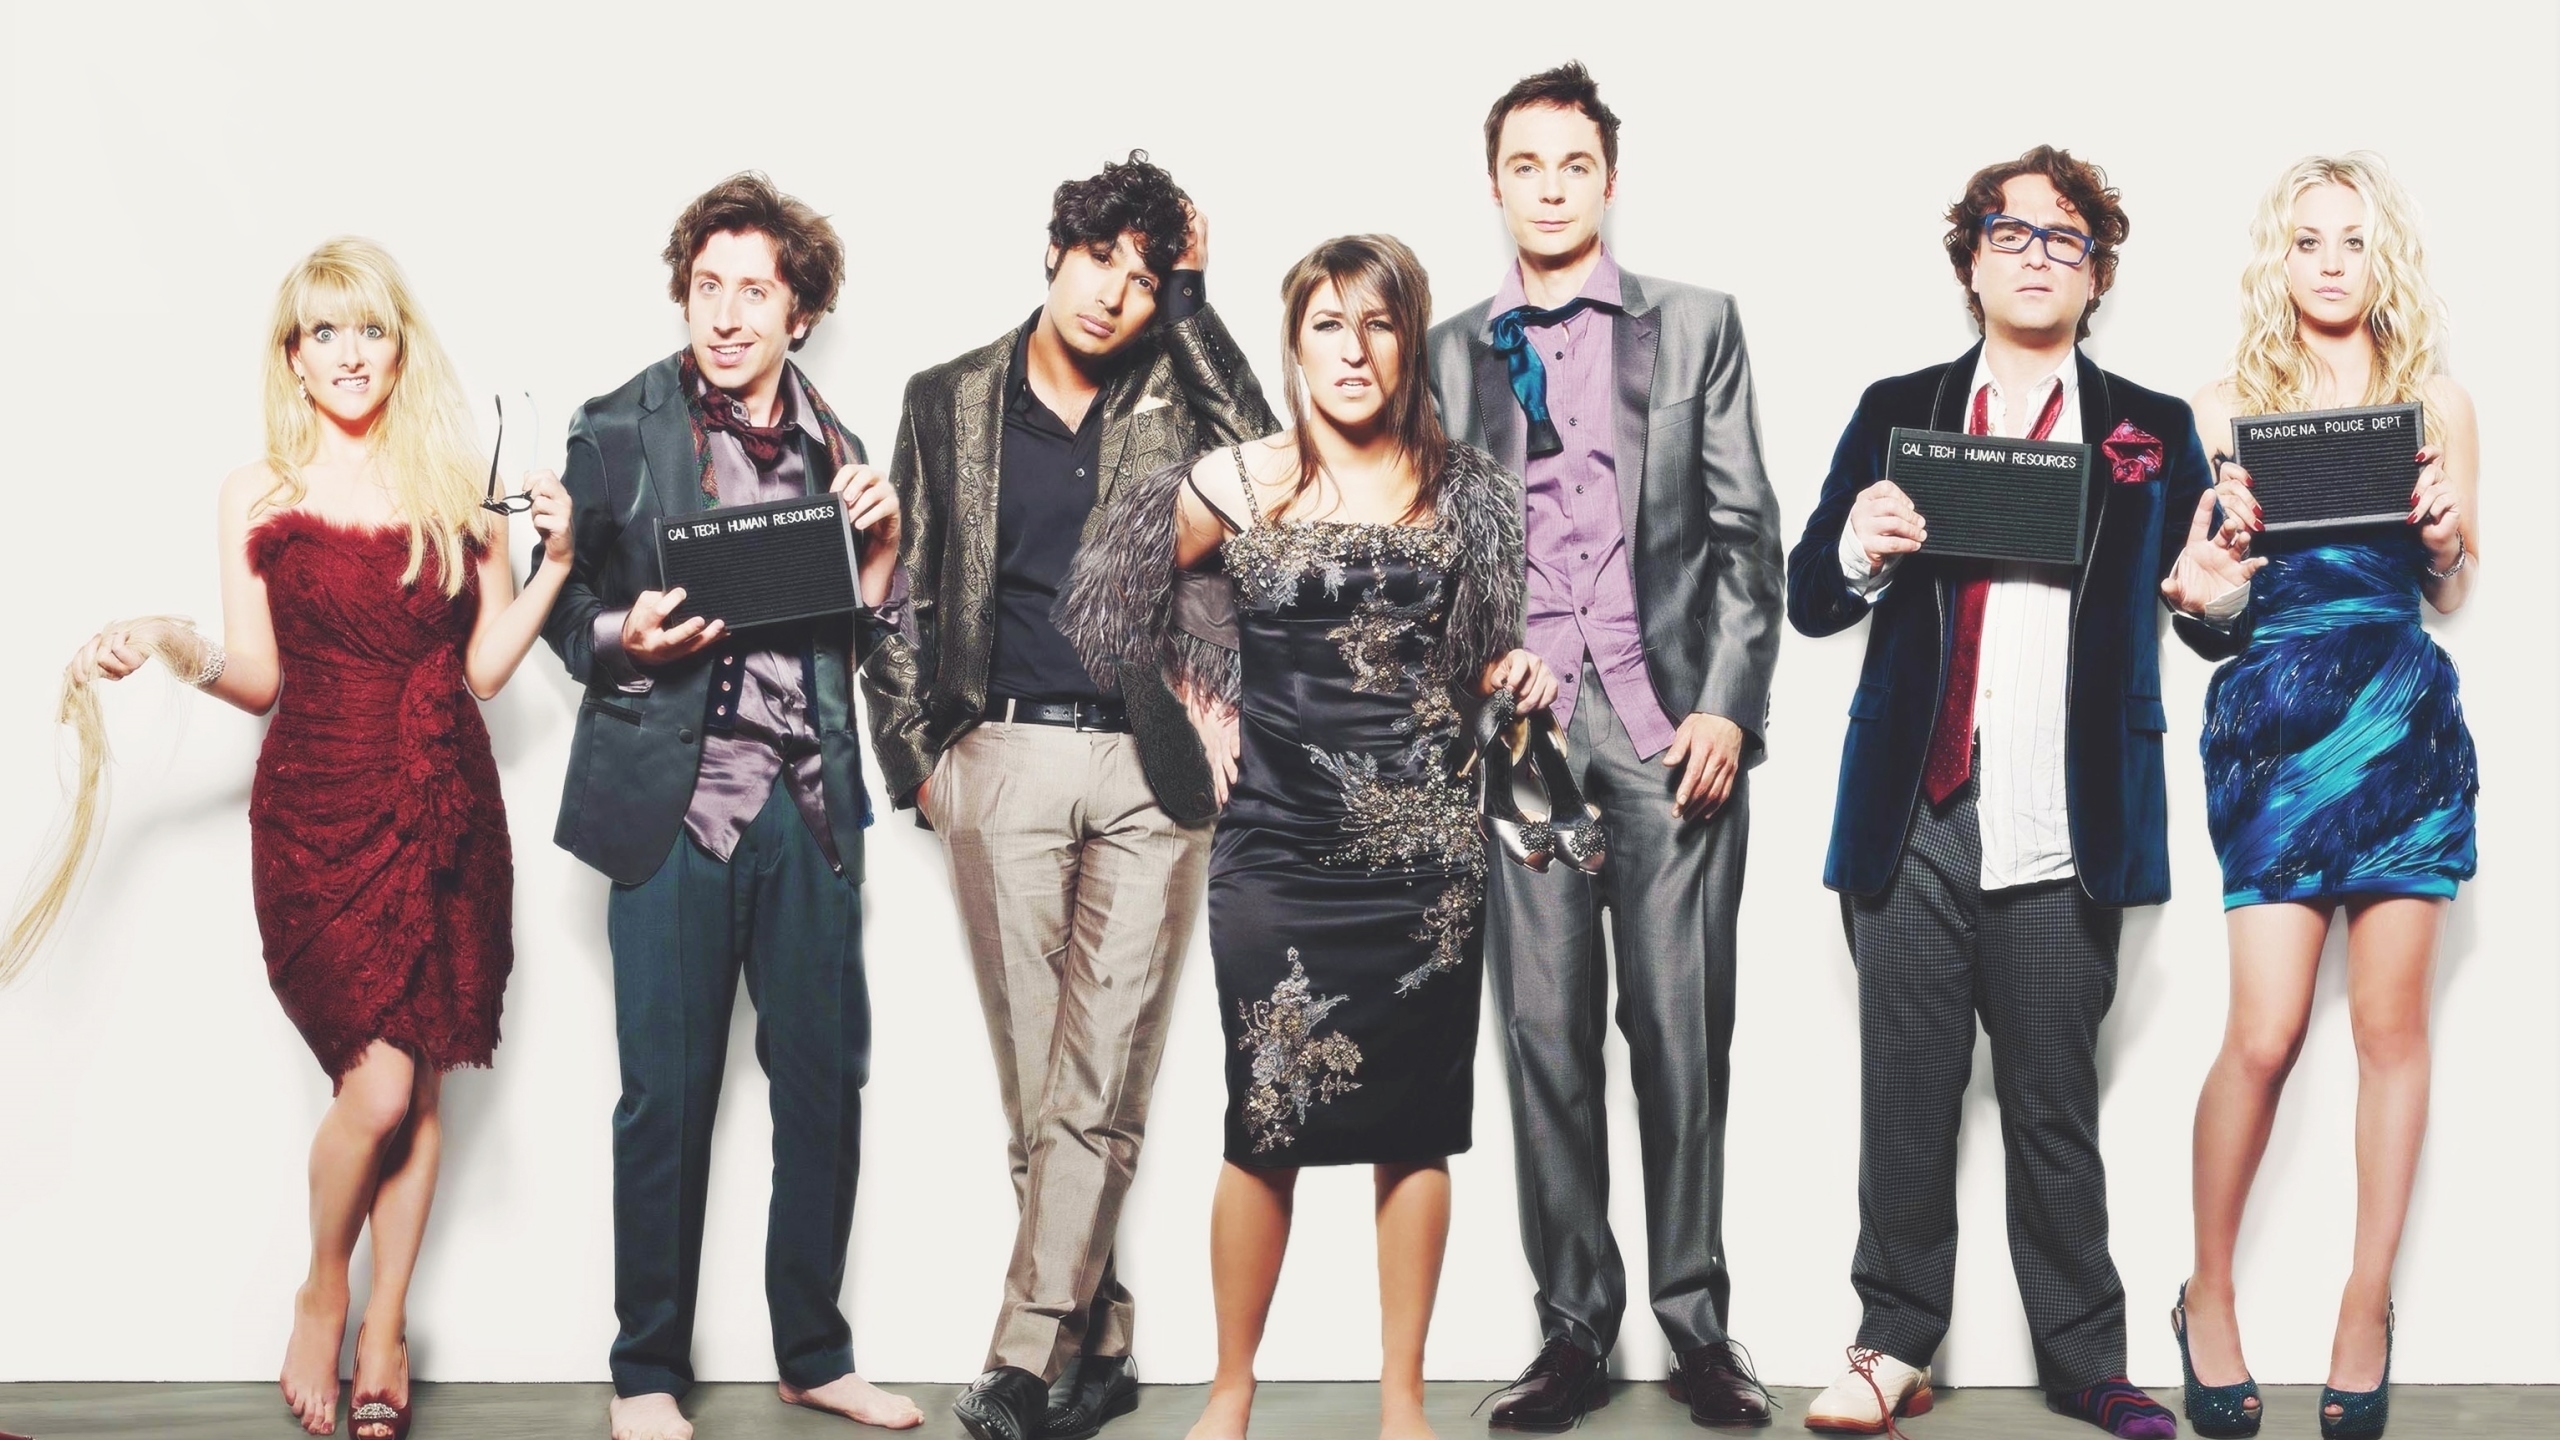 The Big Bang Theory Cast for 2560x1440 HDTV resolution